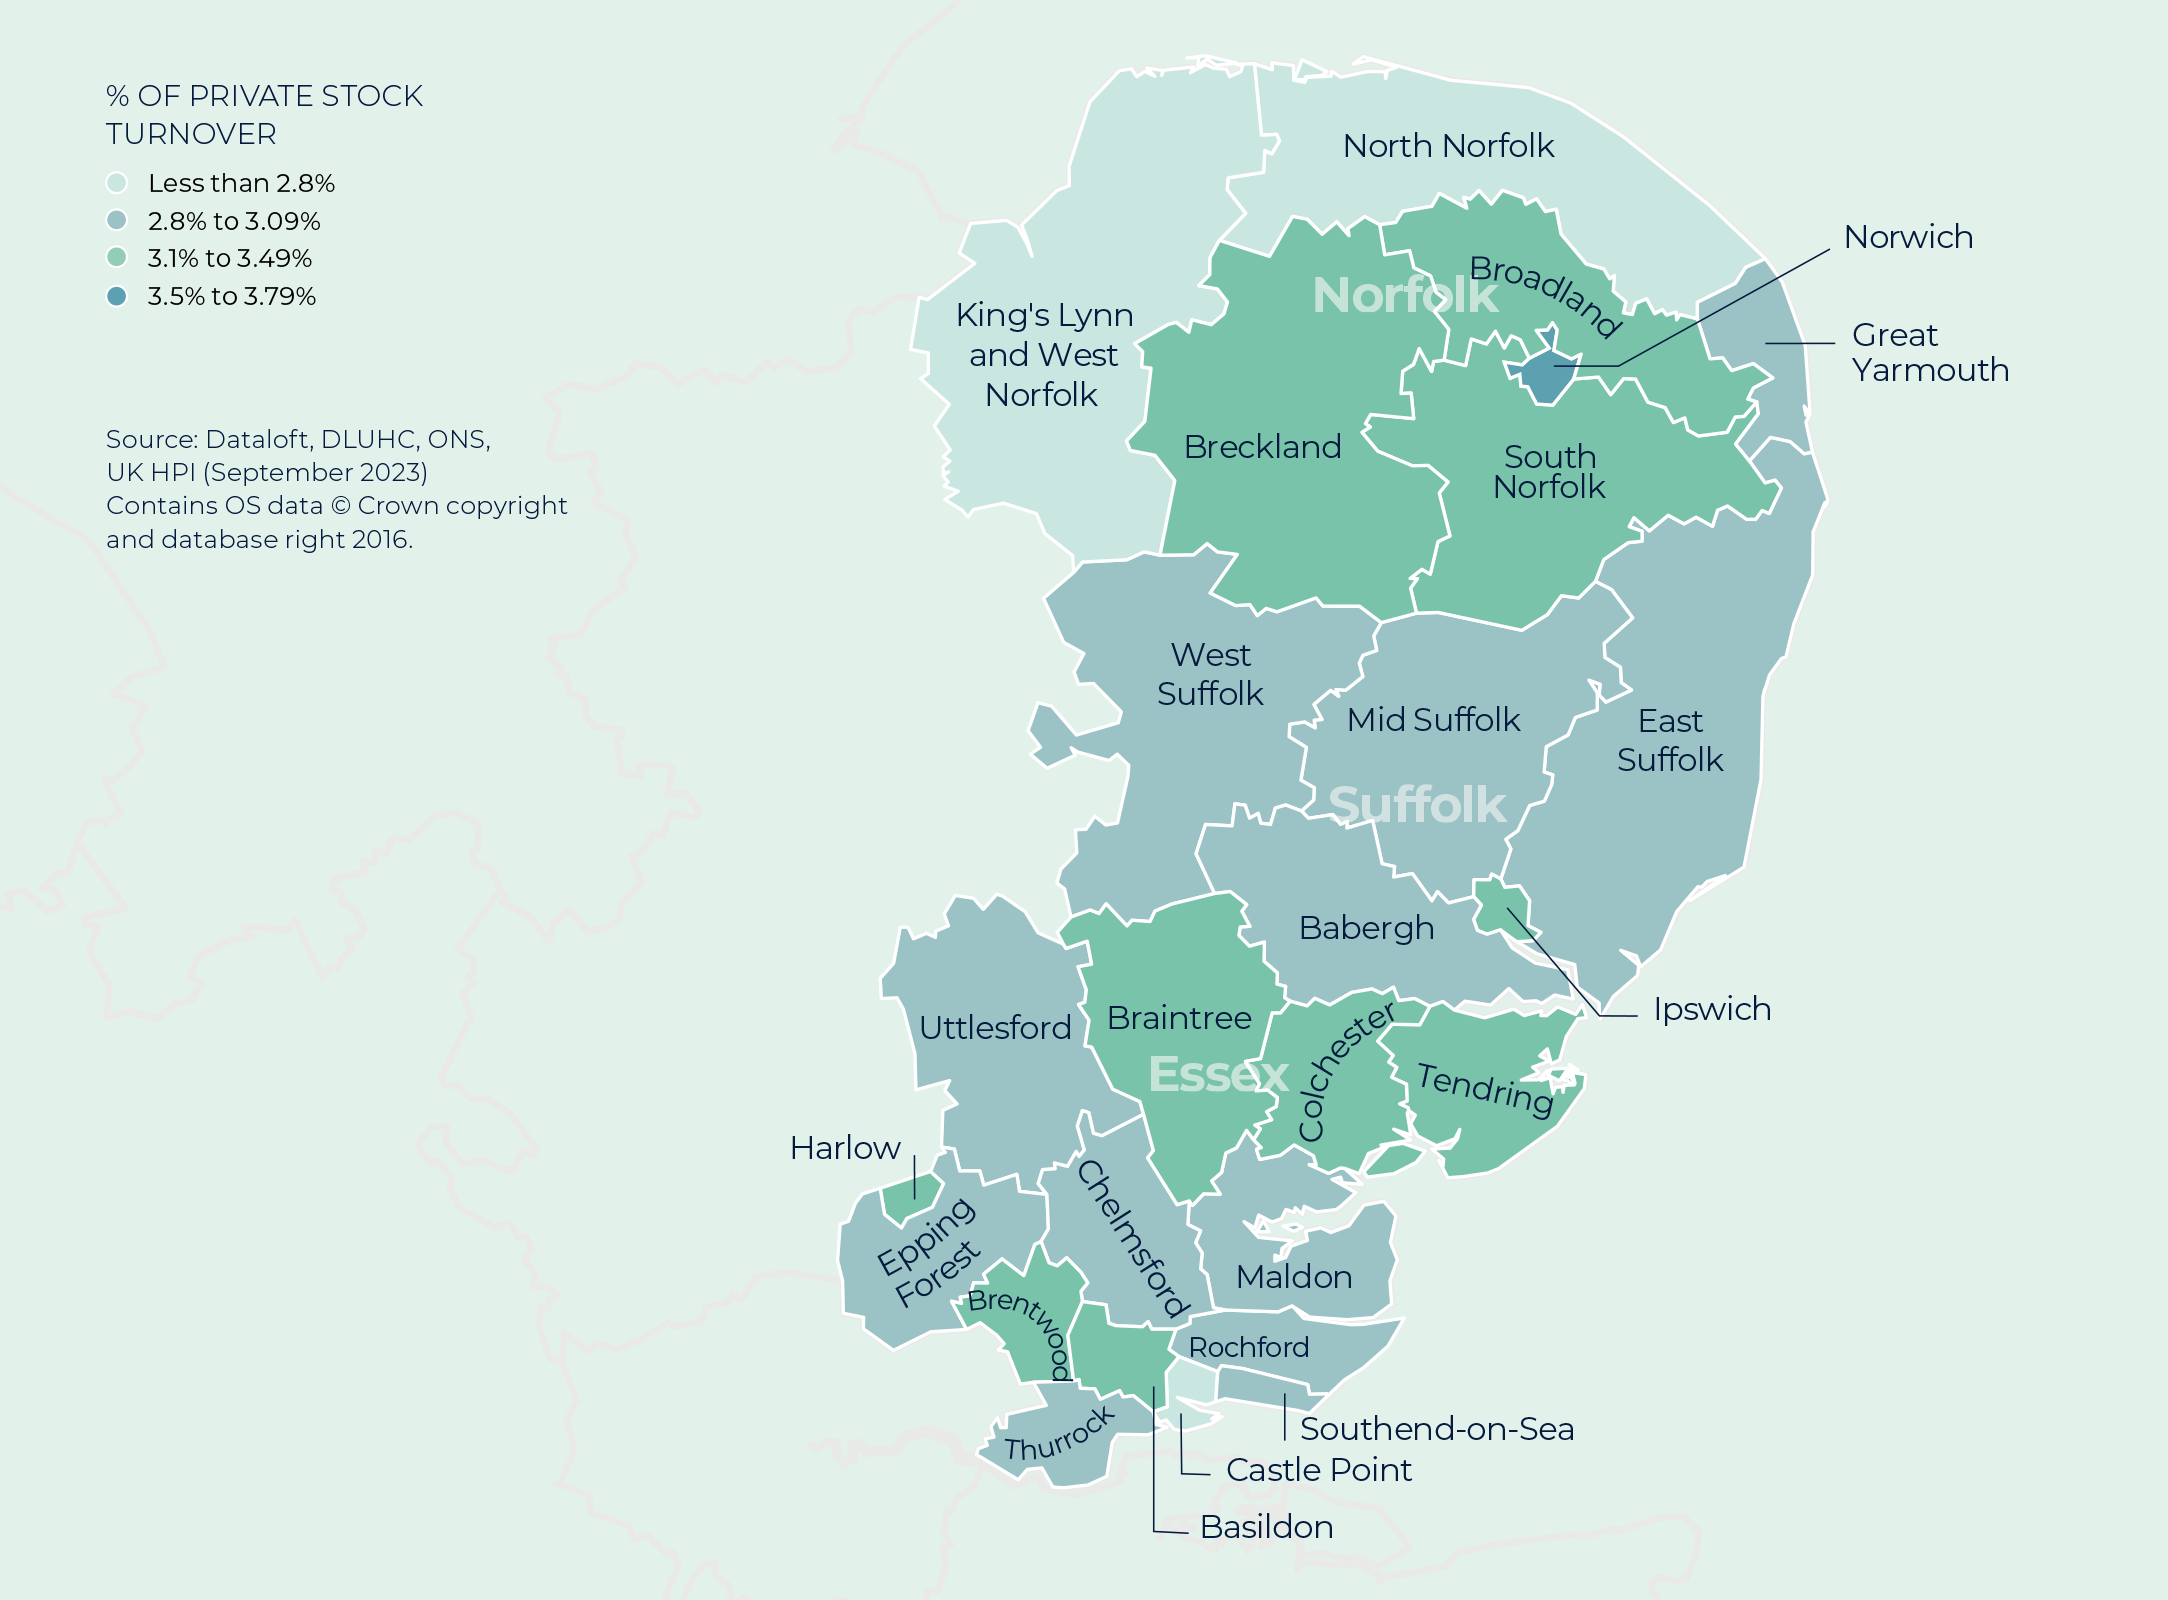 Across Essex, Norfolk and Suffolk, the most active housing markets are currently those of Norwich, Braintree and Breckland